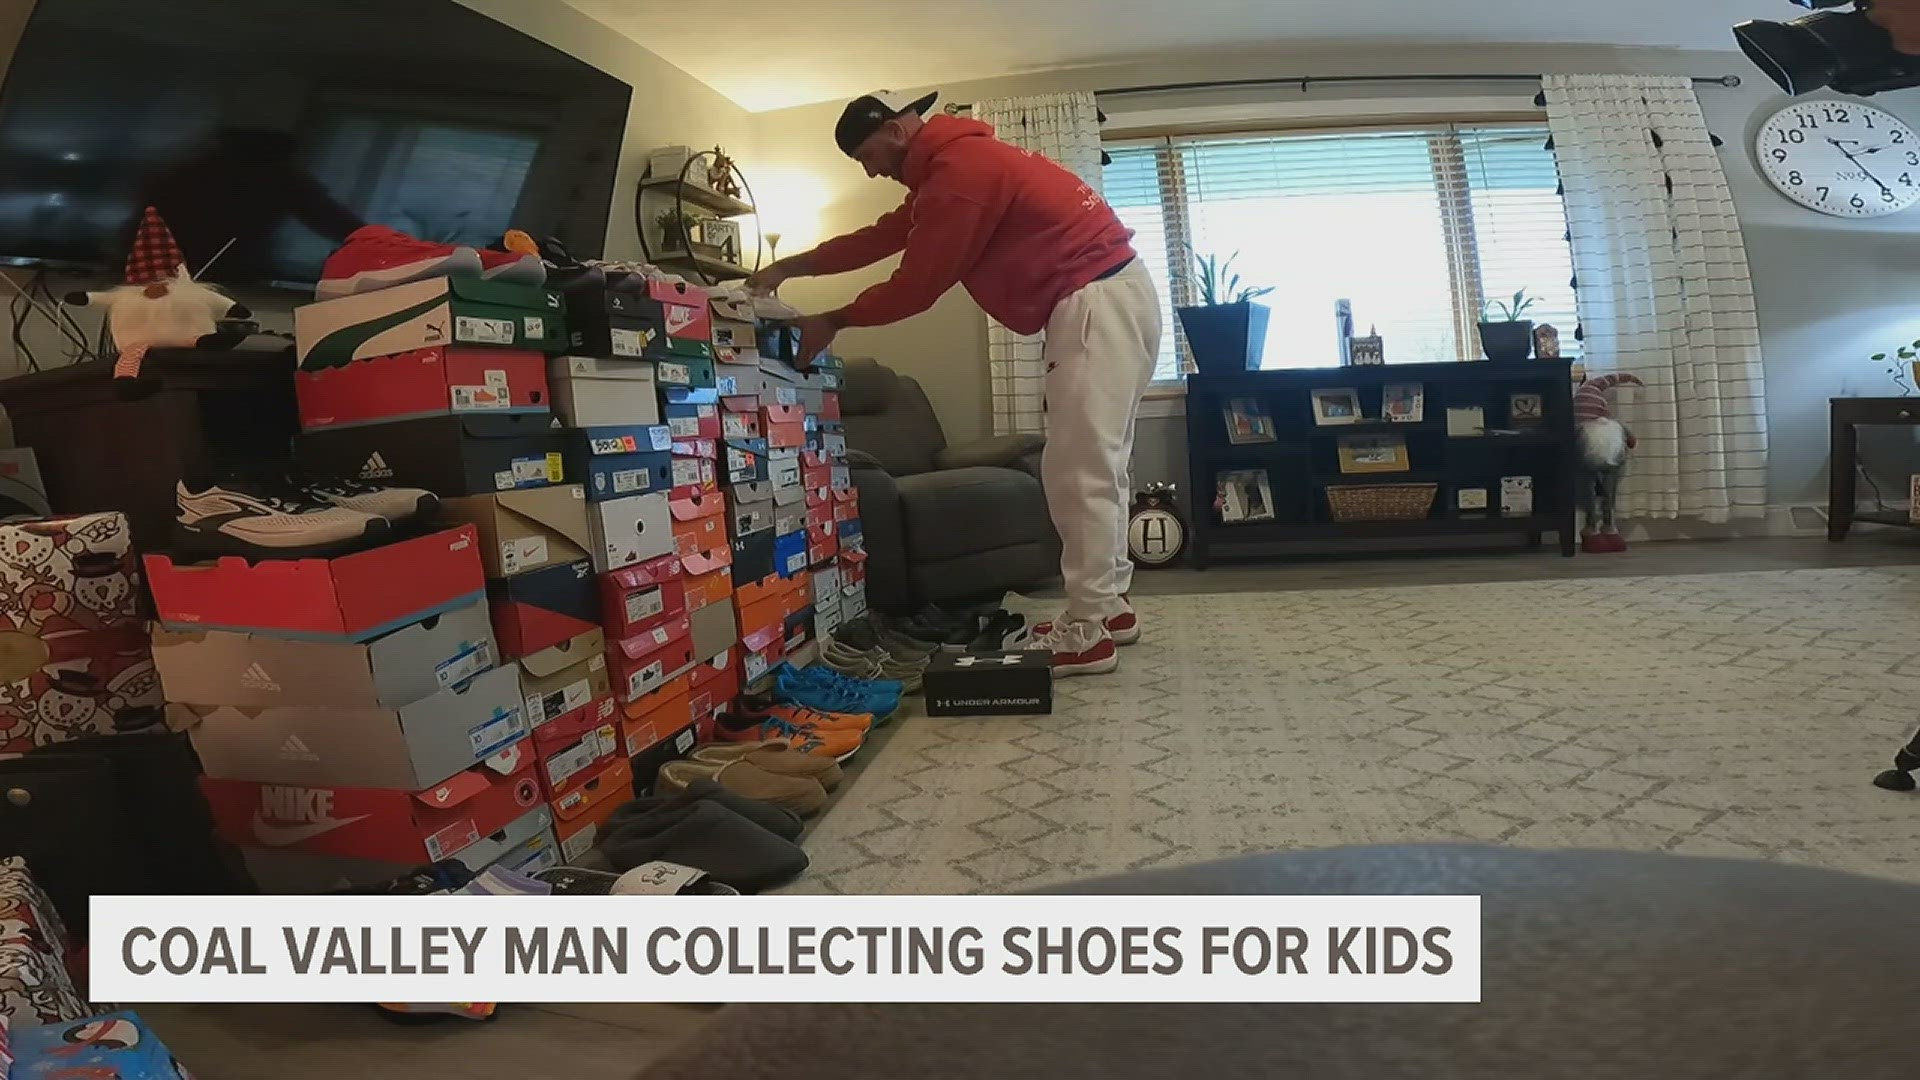 Brent Hamerlinck has had an interest in sneaker culture for many years. He now hopes to share it with children in need.